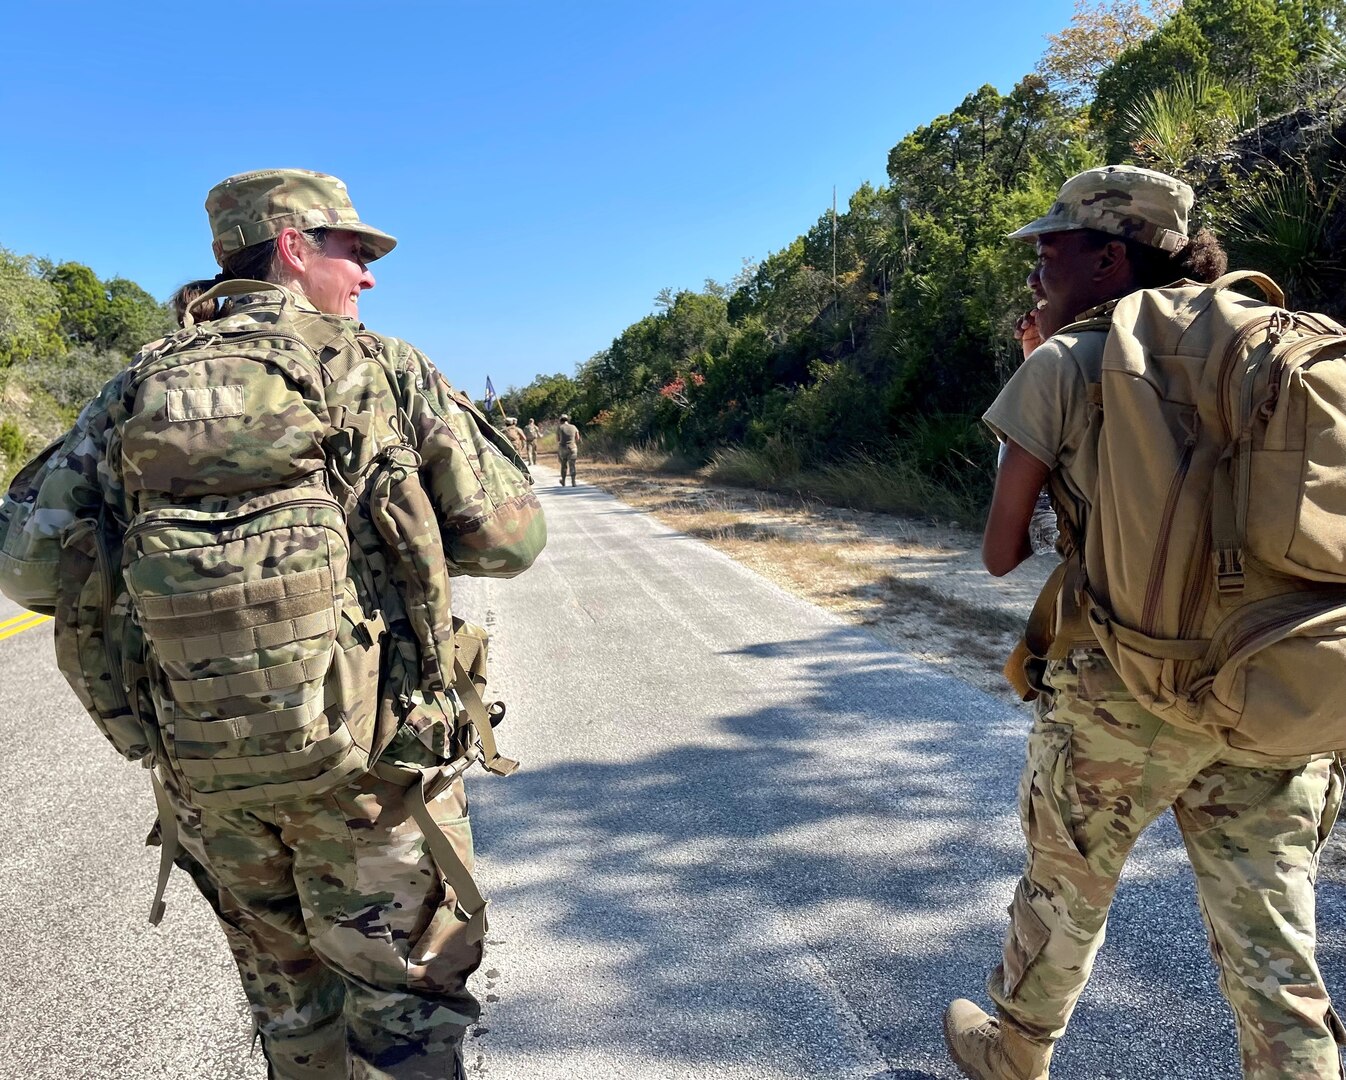 Col Storm marches alongside Airmen at ruck